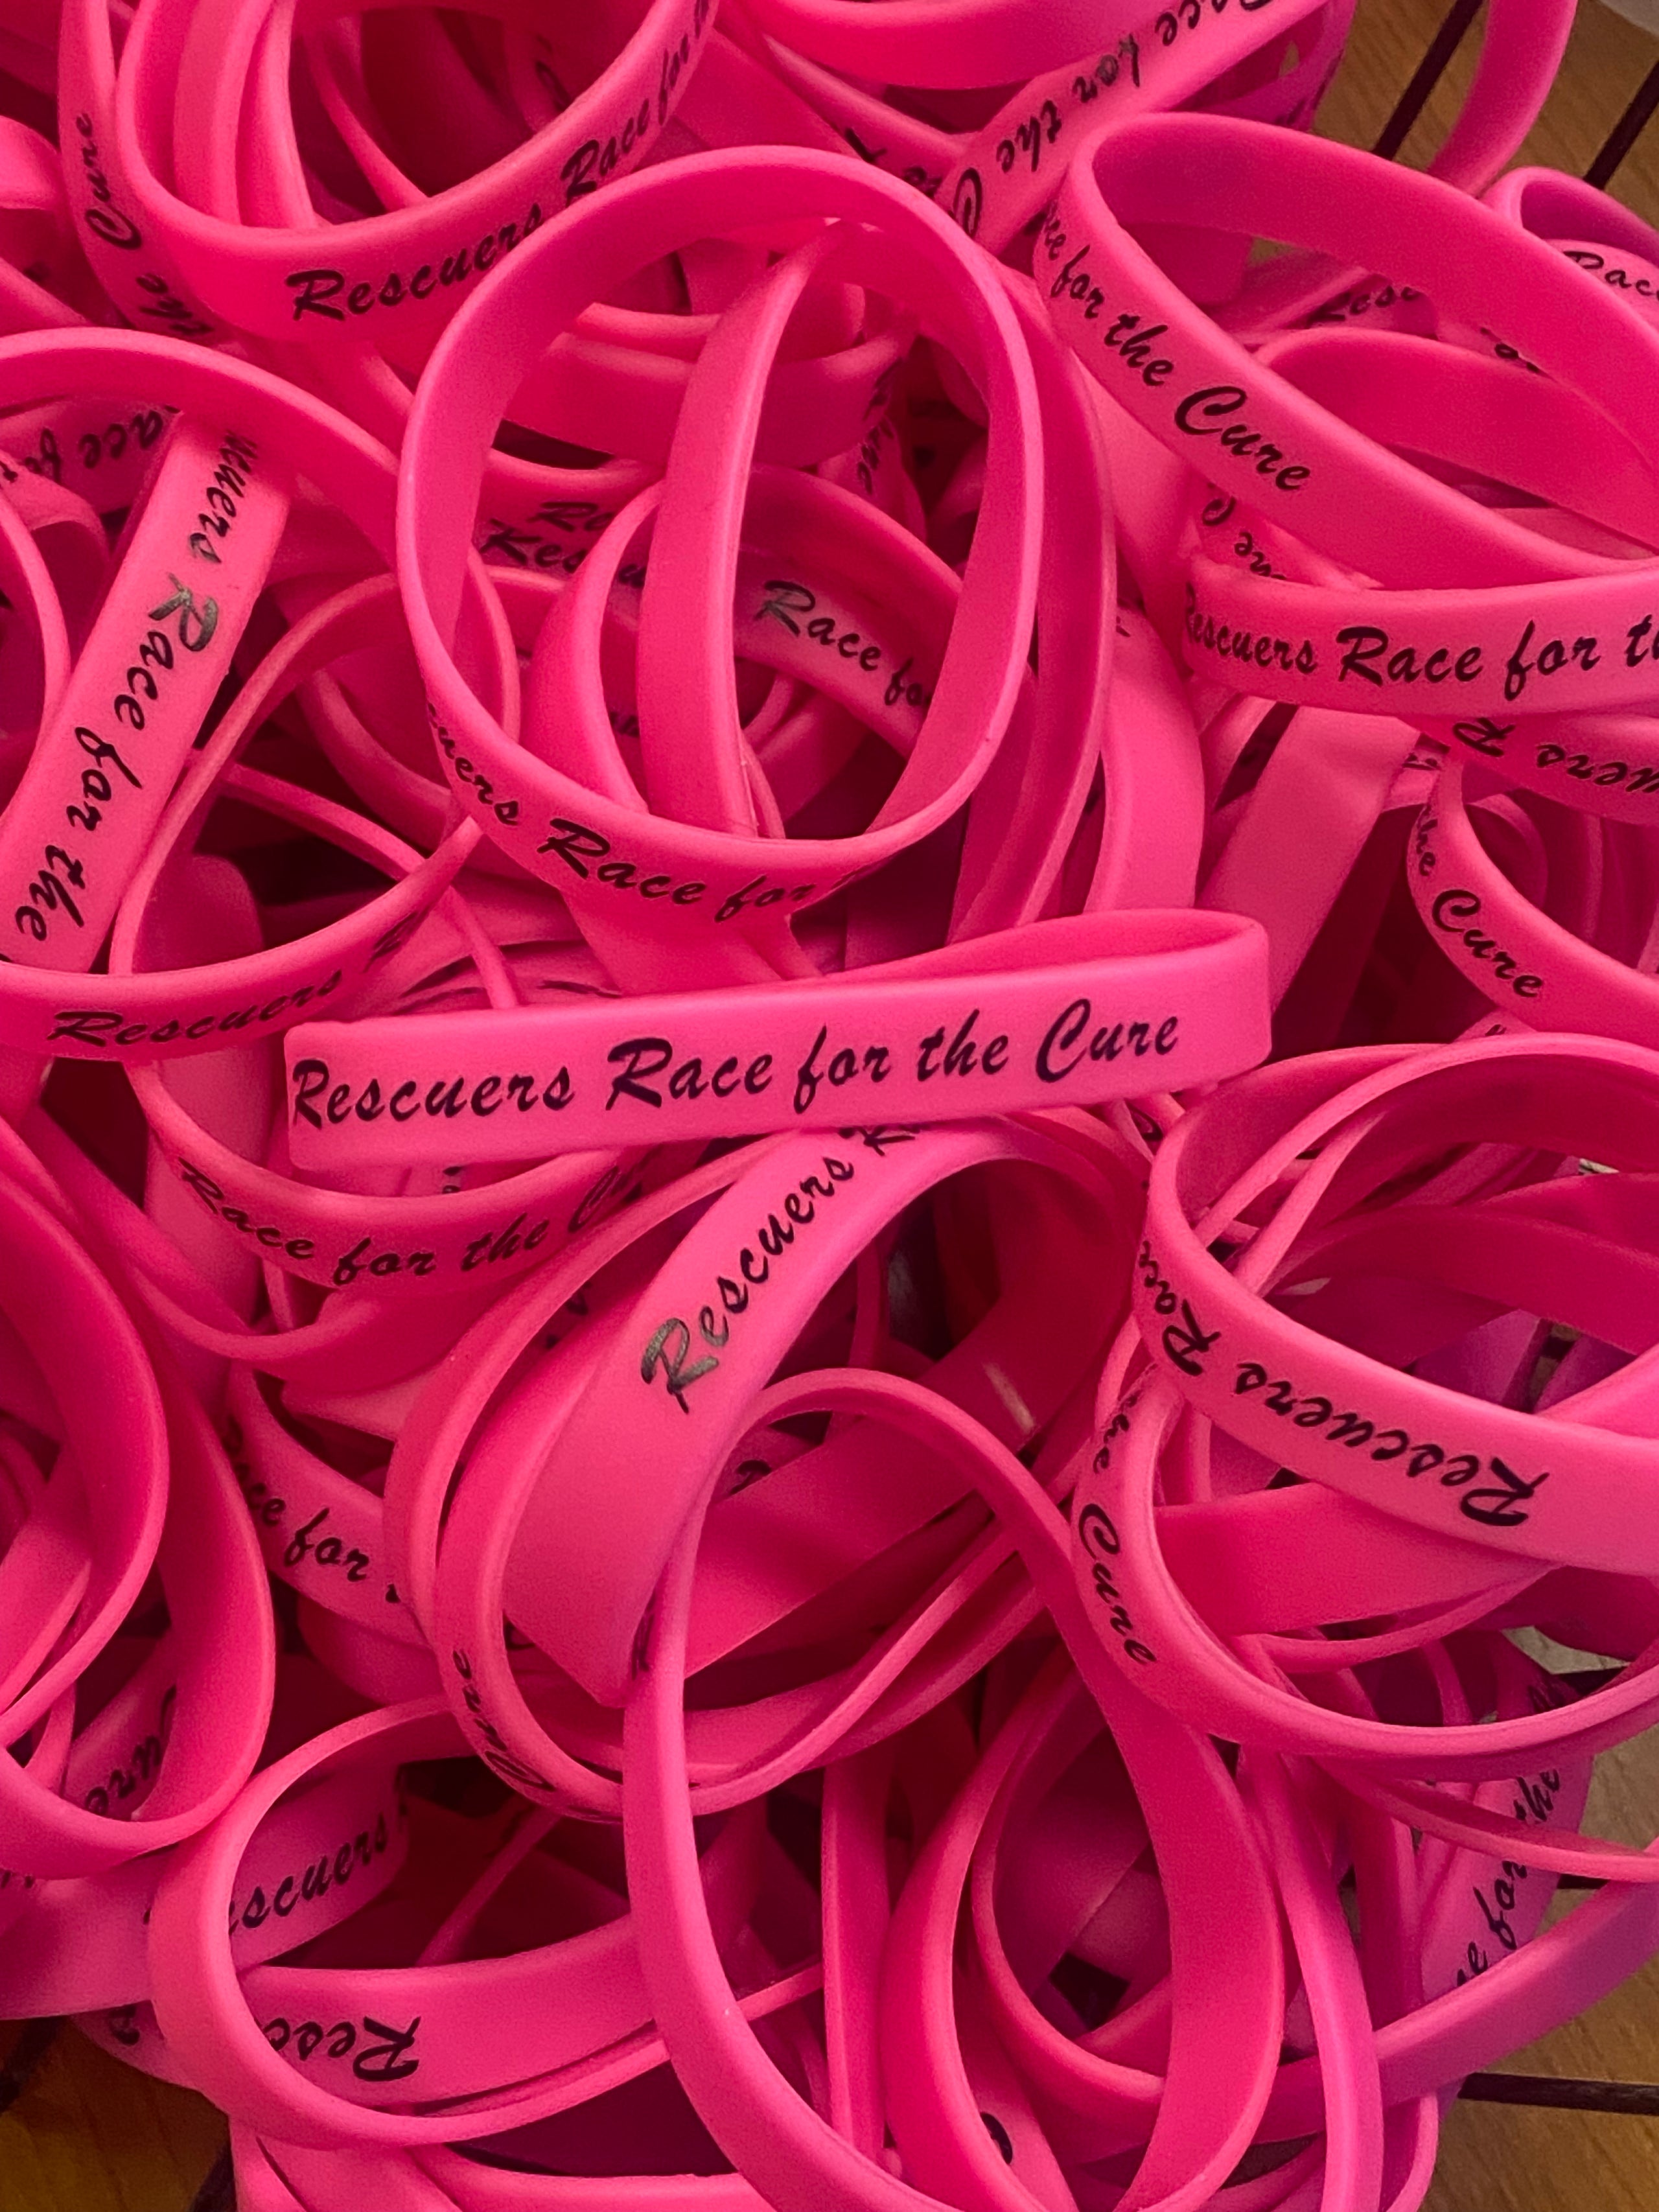 “Rescuers Race for the Cure” Pink Bracelet | My Site